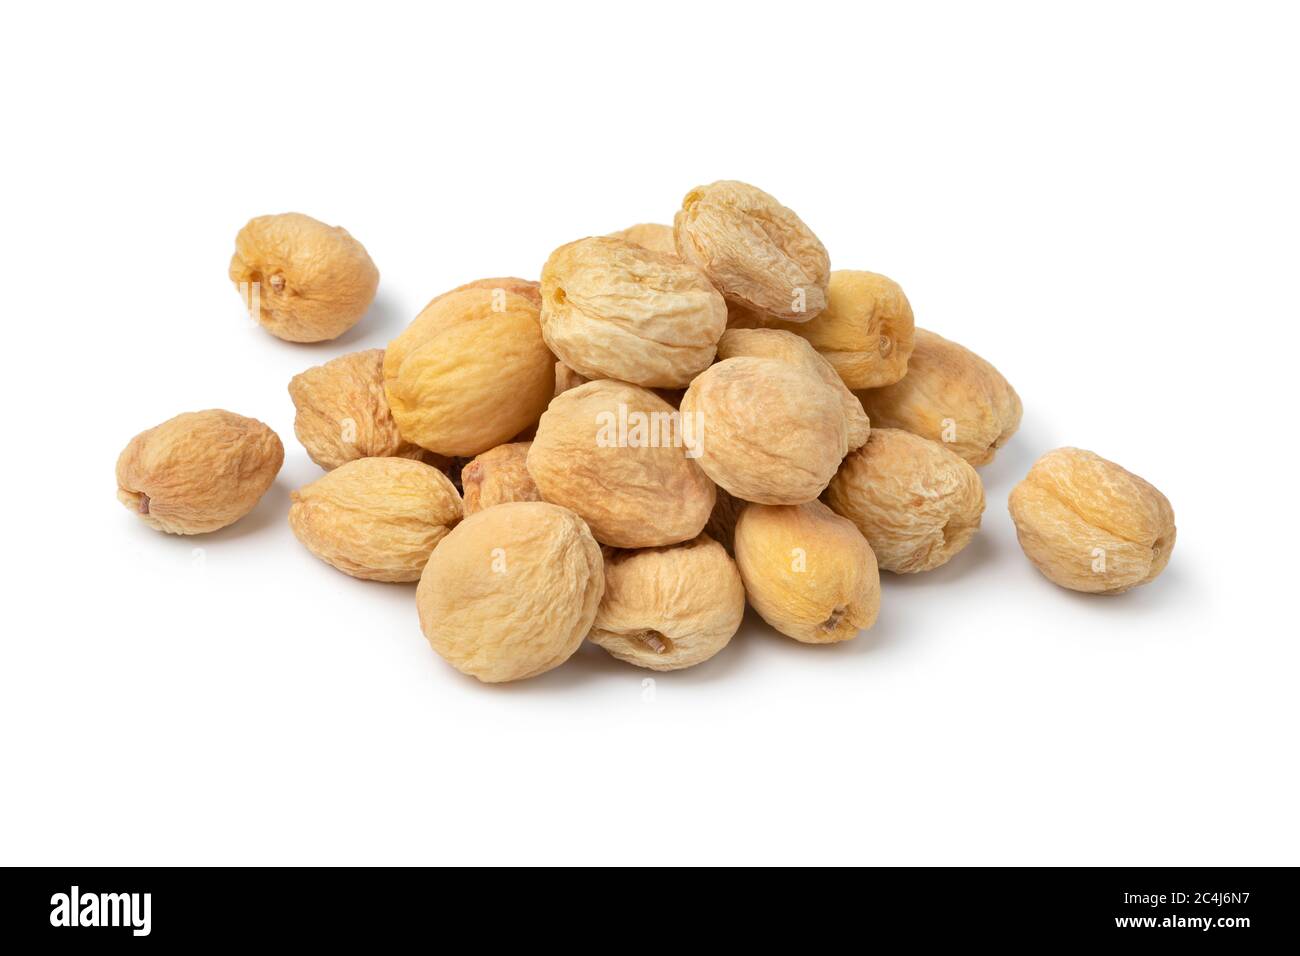 Heap of dried sweet orange apricots with seed inside without preservatives isolated on white background Stock Photo